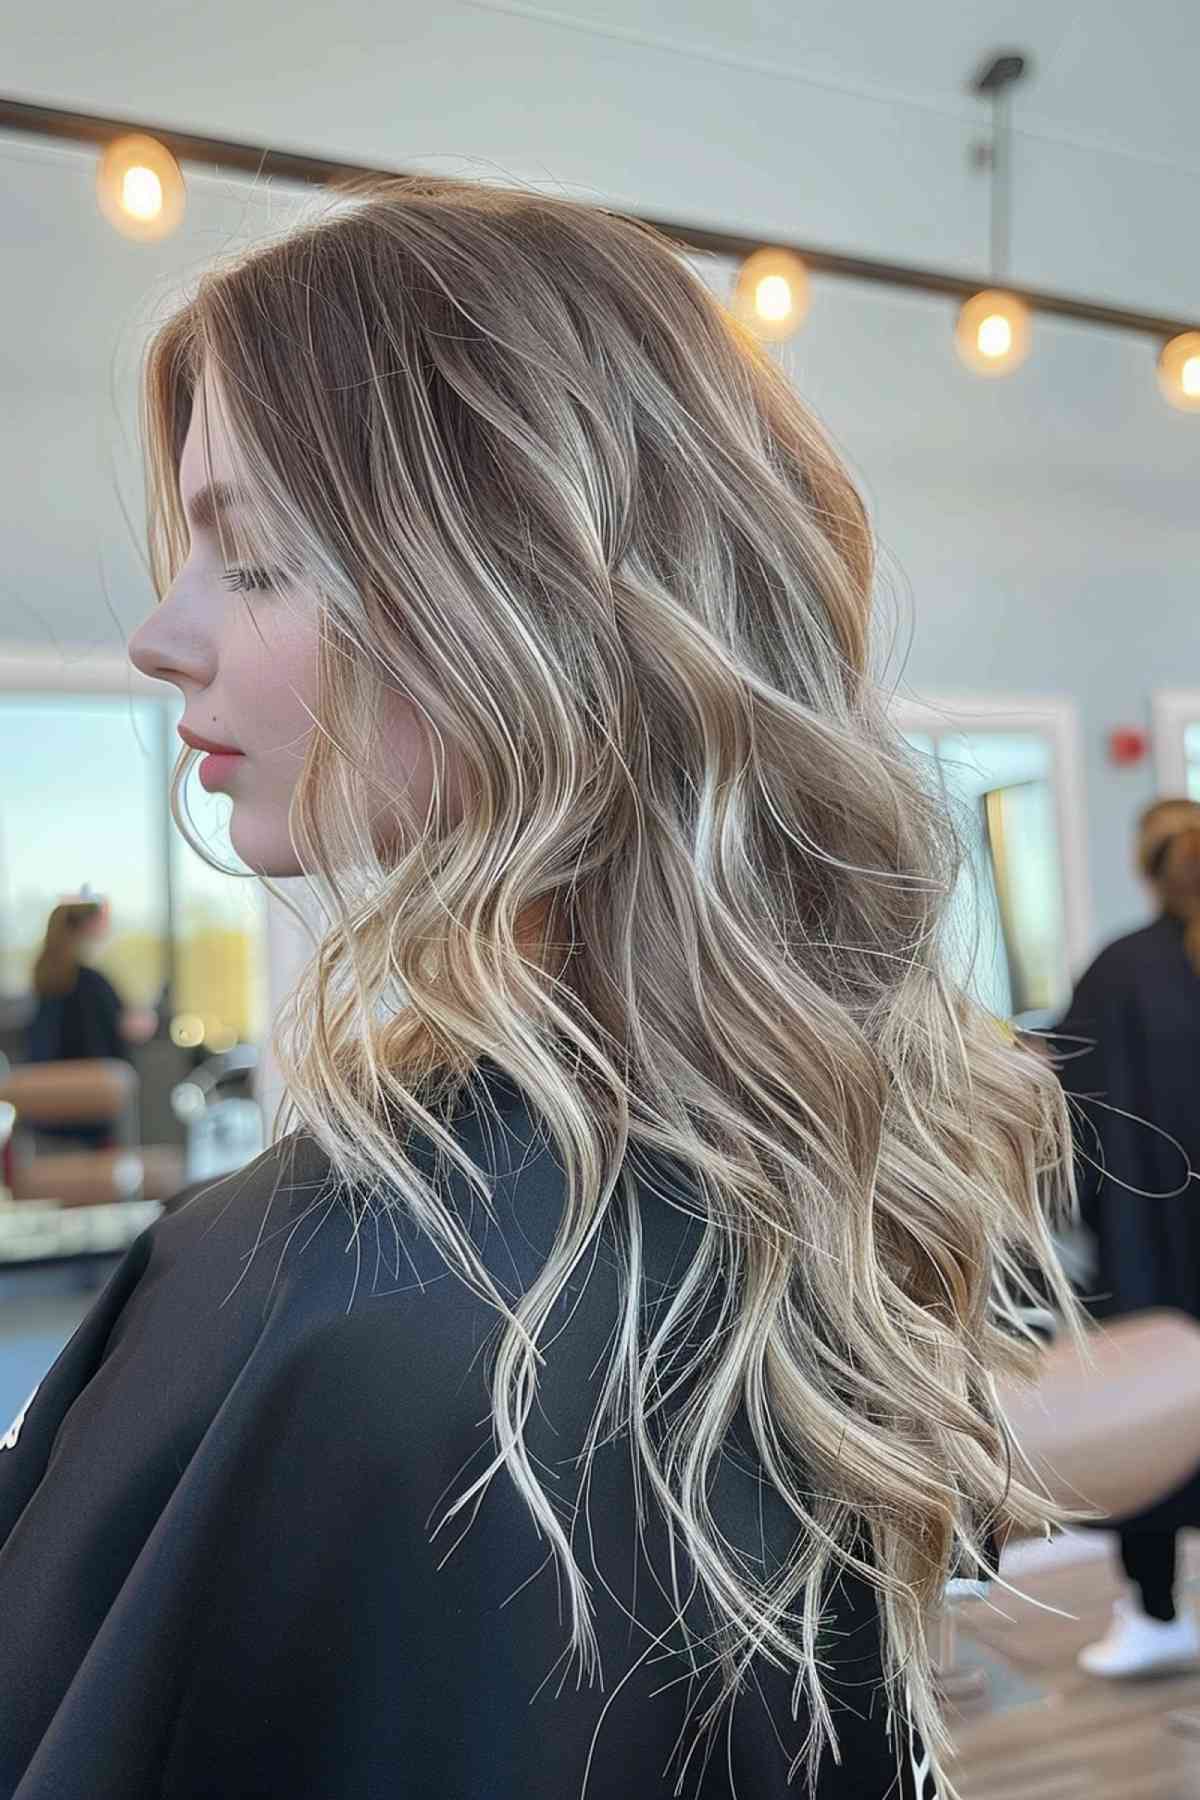 Long Layered Blonde Hair with Mixed Tones and Soft Curls